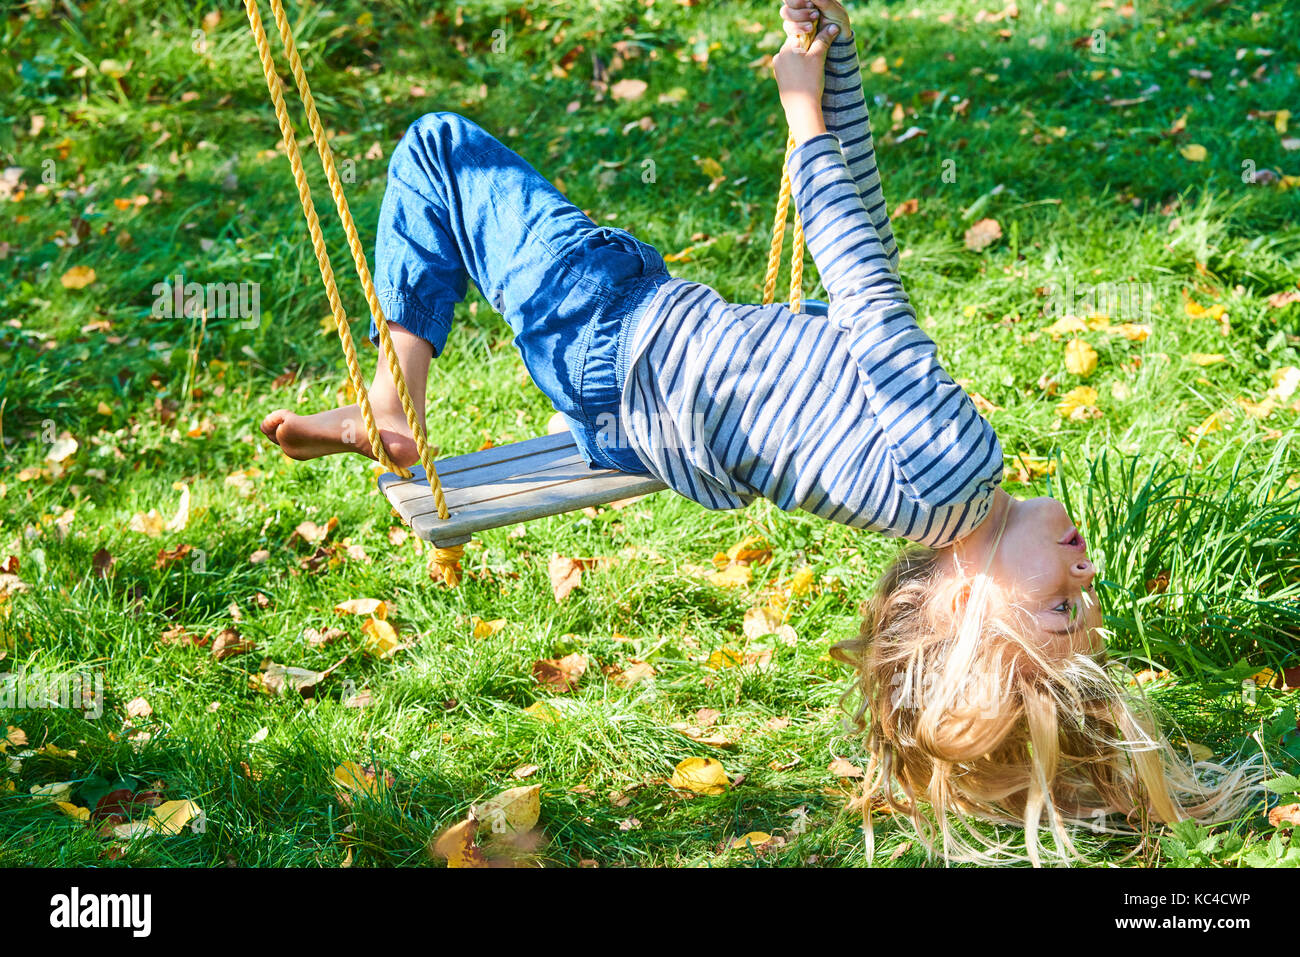 Little child blond girl having fun on a swing outdoor. Summer playground. Girl swinging high. Young child on swing in garden Stock Photo